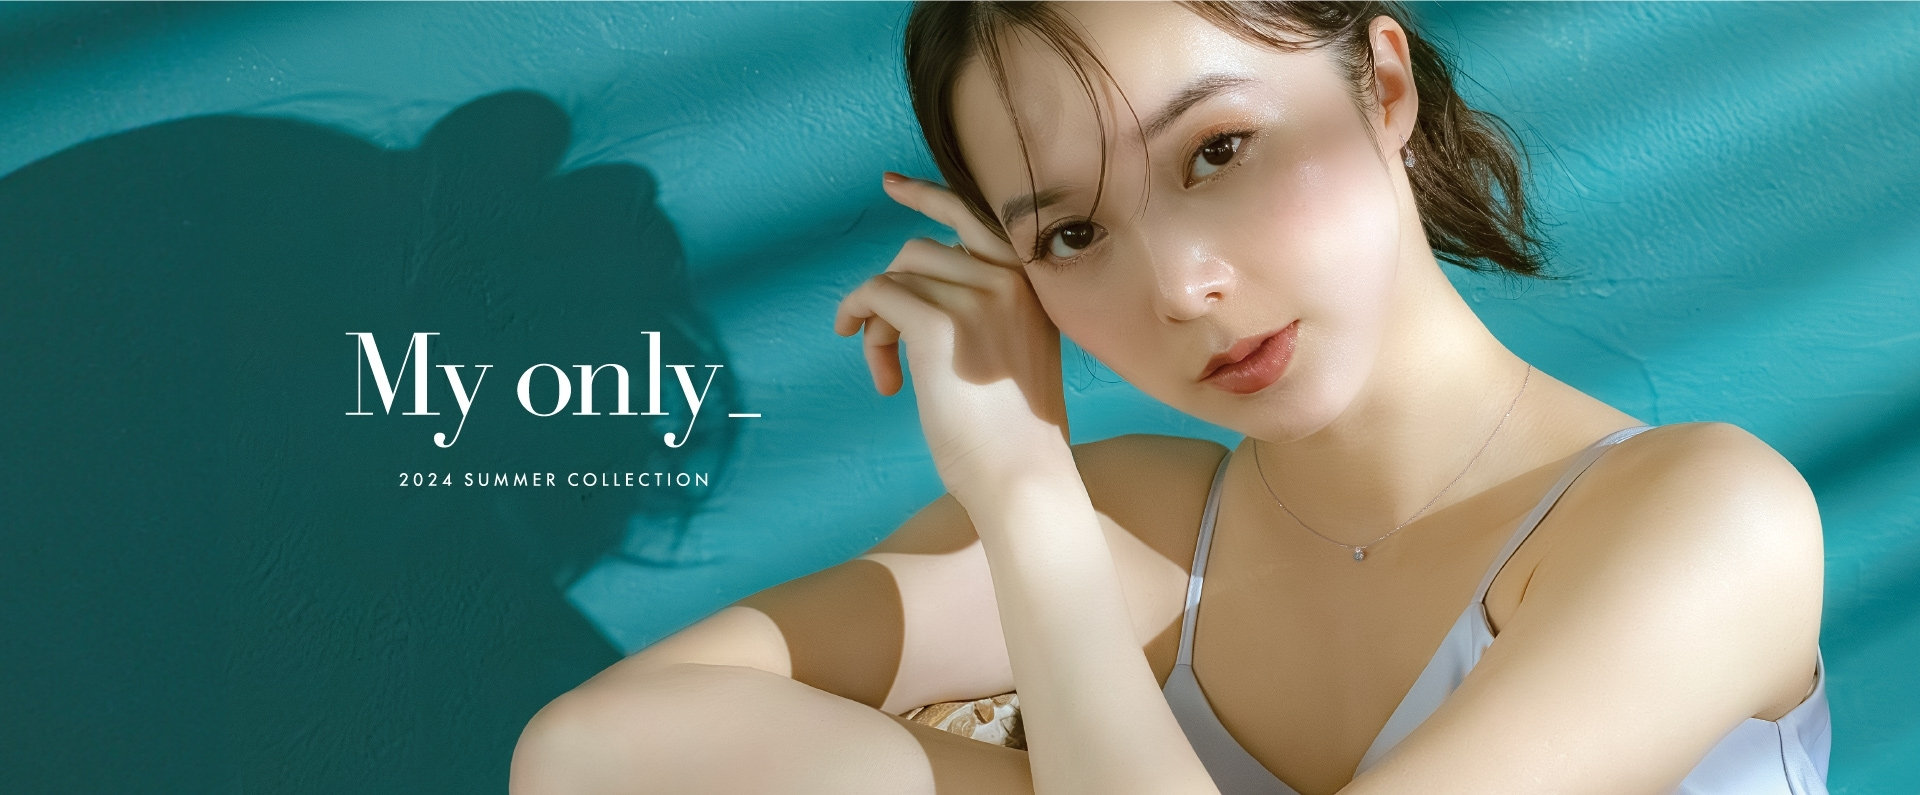 My only _ | 2024 Summer Collection